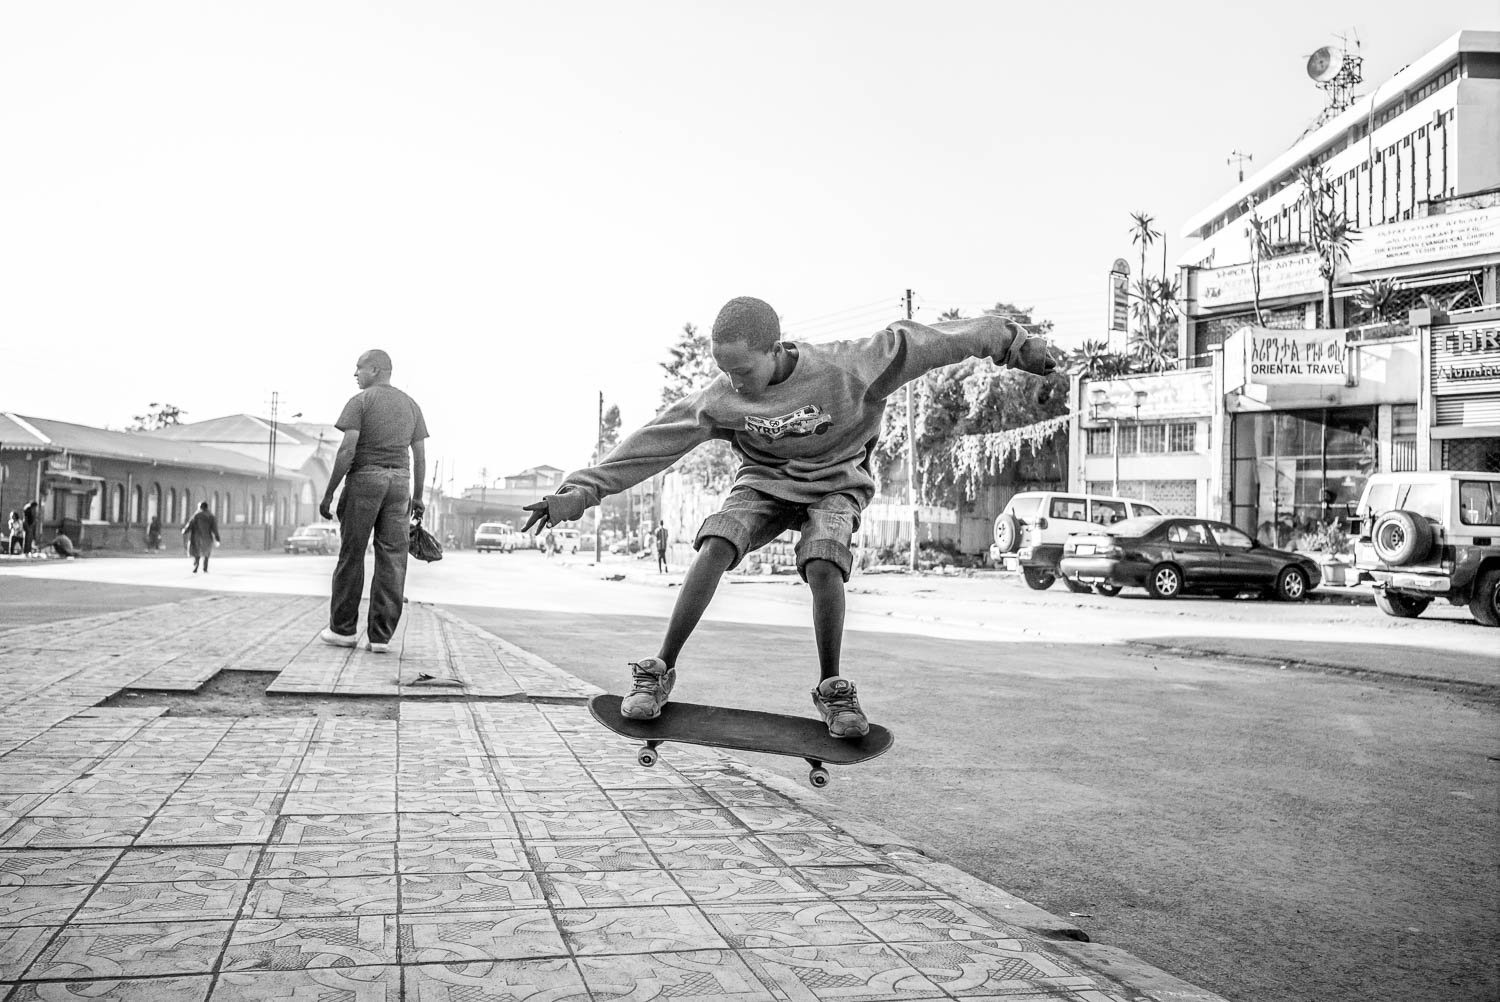 One for the diary Ethiopia Skate - photography by Daniel Reiter at Rich